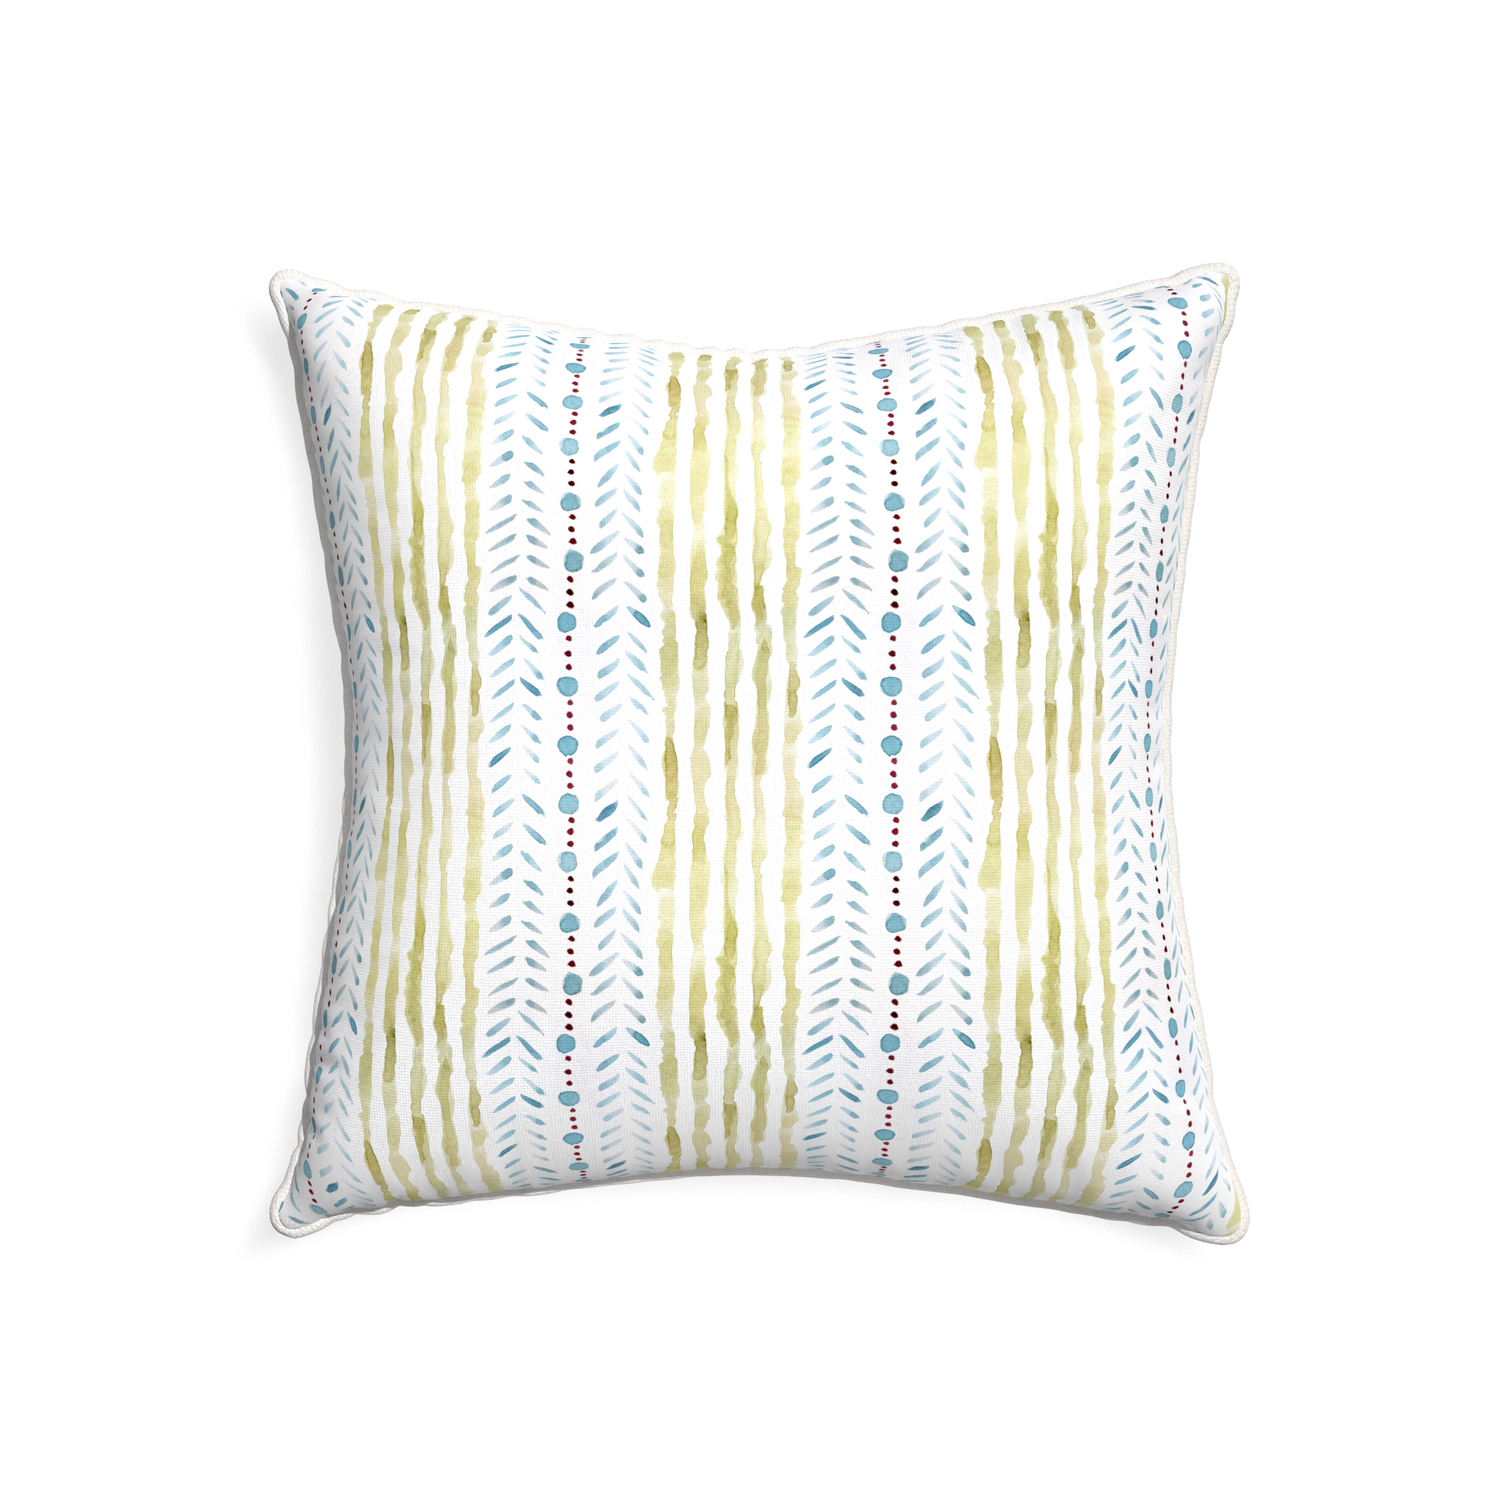 22-square julia custom pillow with snow piping on white background